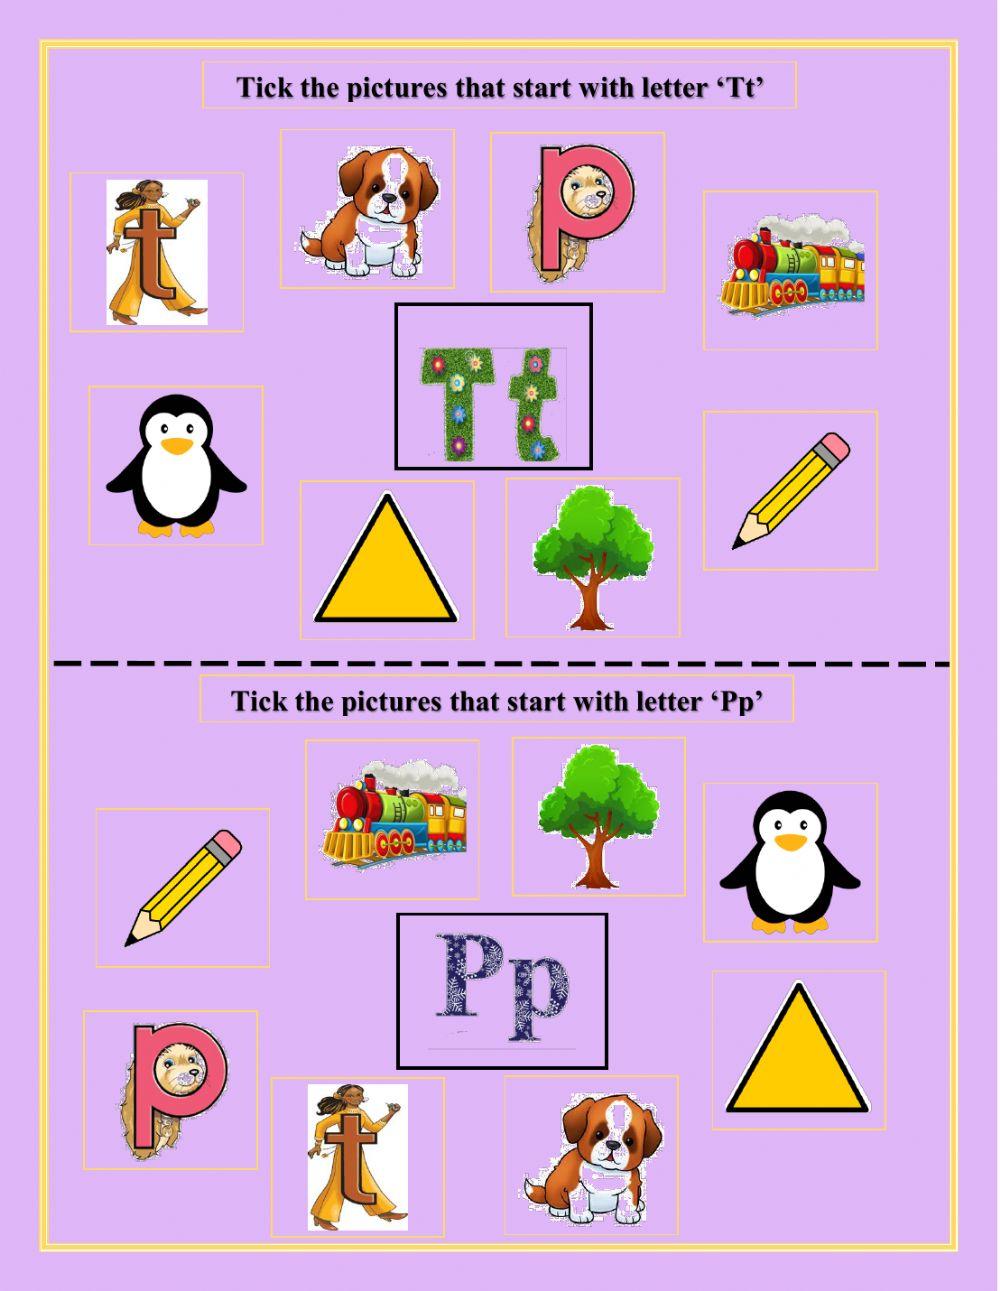 Tick the pictures that start with letter ‘Tt’ and 'Pp'